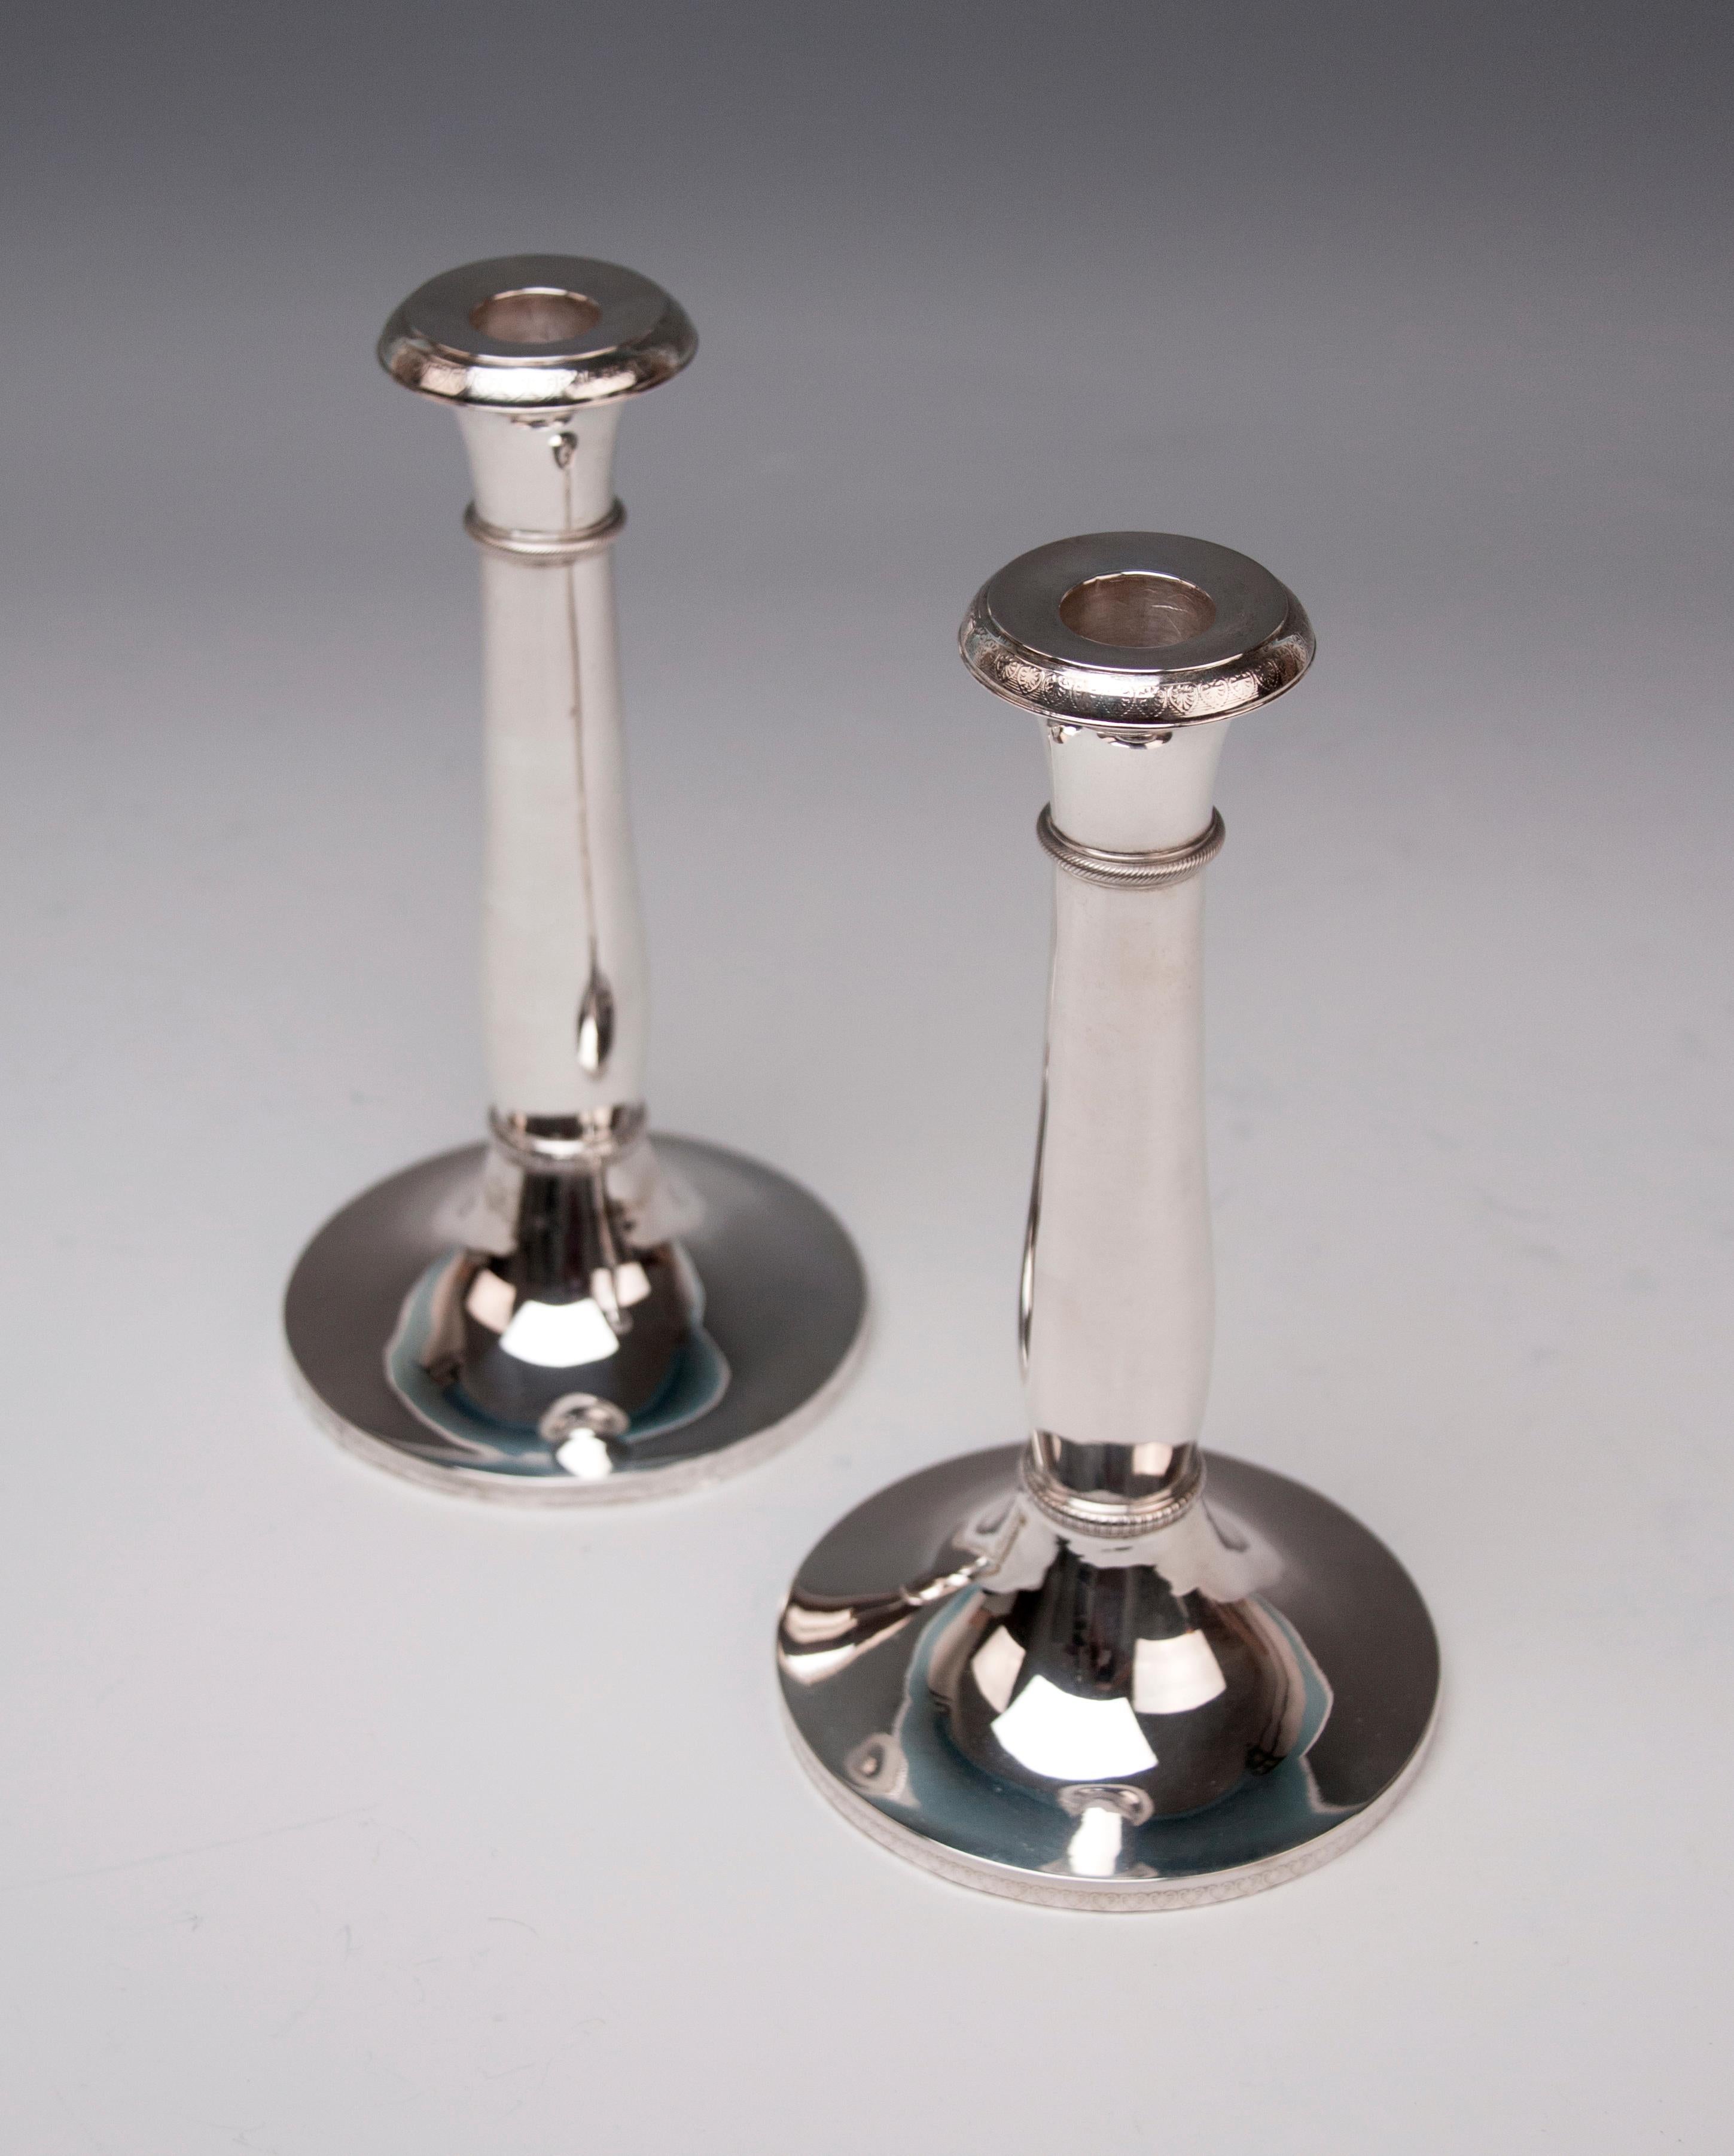 Austrian excellent Biedermeier silver pair of candlesticks, made circa 1830.

Very interesting Viennese silver pair of candlesticks of finest manufacturing quality as well as of elegant appearance. These candlesticks were made during climax of